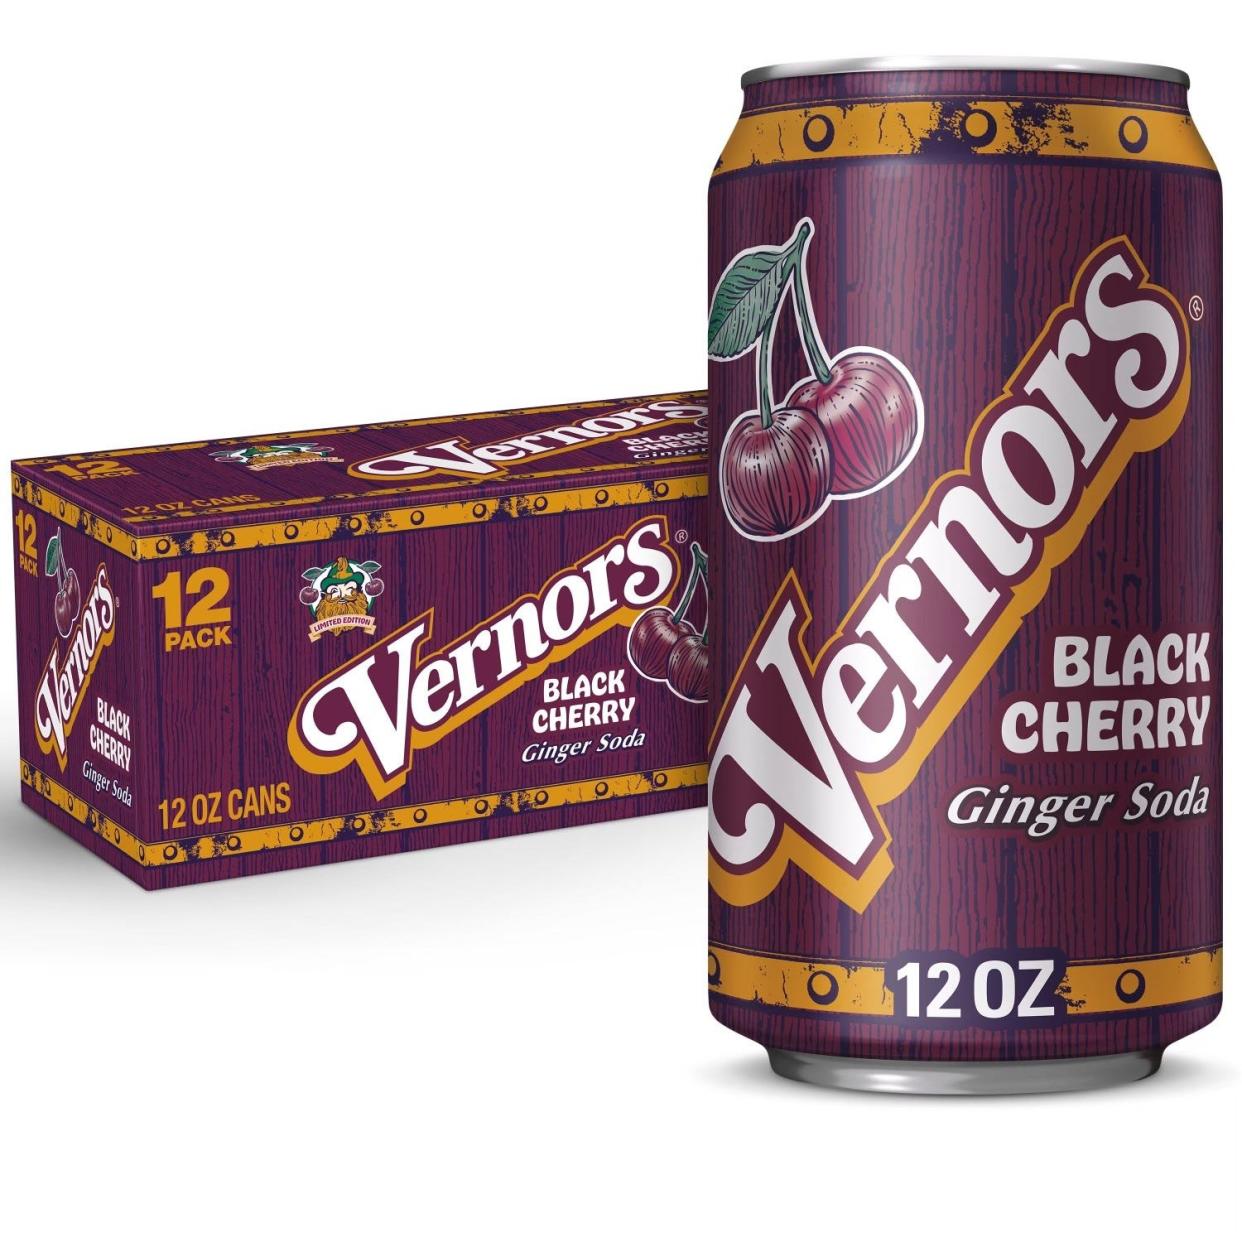 Black Cherry Vernors will be available only in Michigan and Toledo markets.